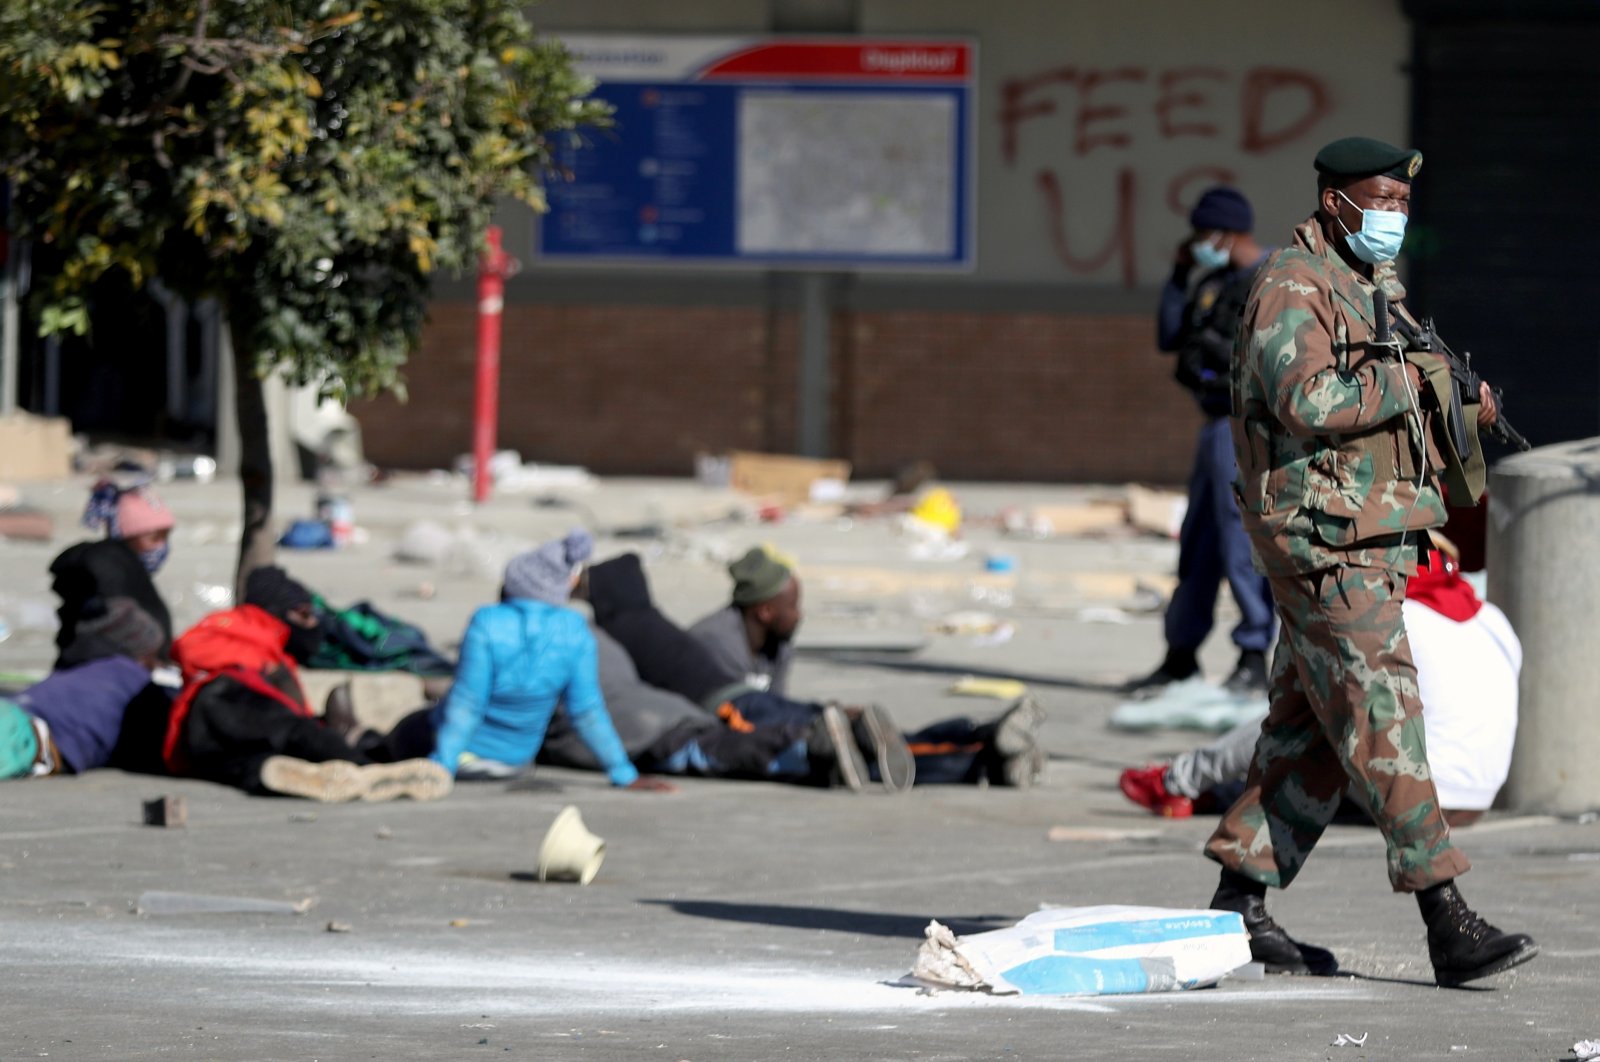 22 more die when violence seizes South Africa